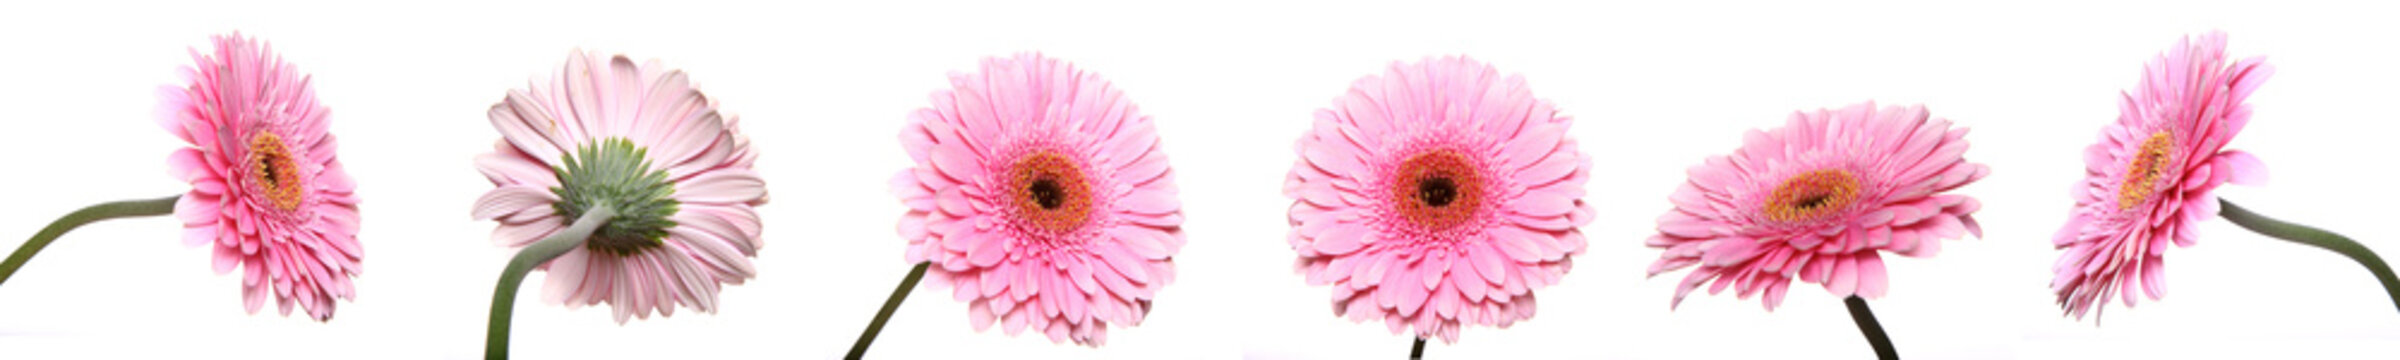 Different shots of gerberas on white background